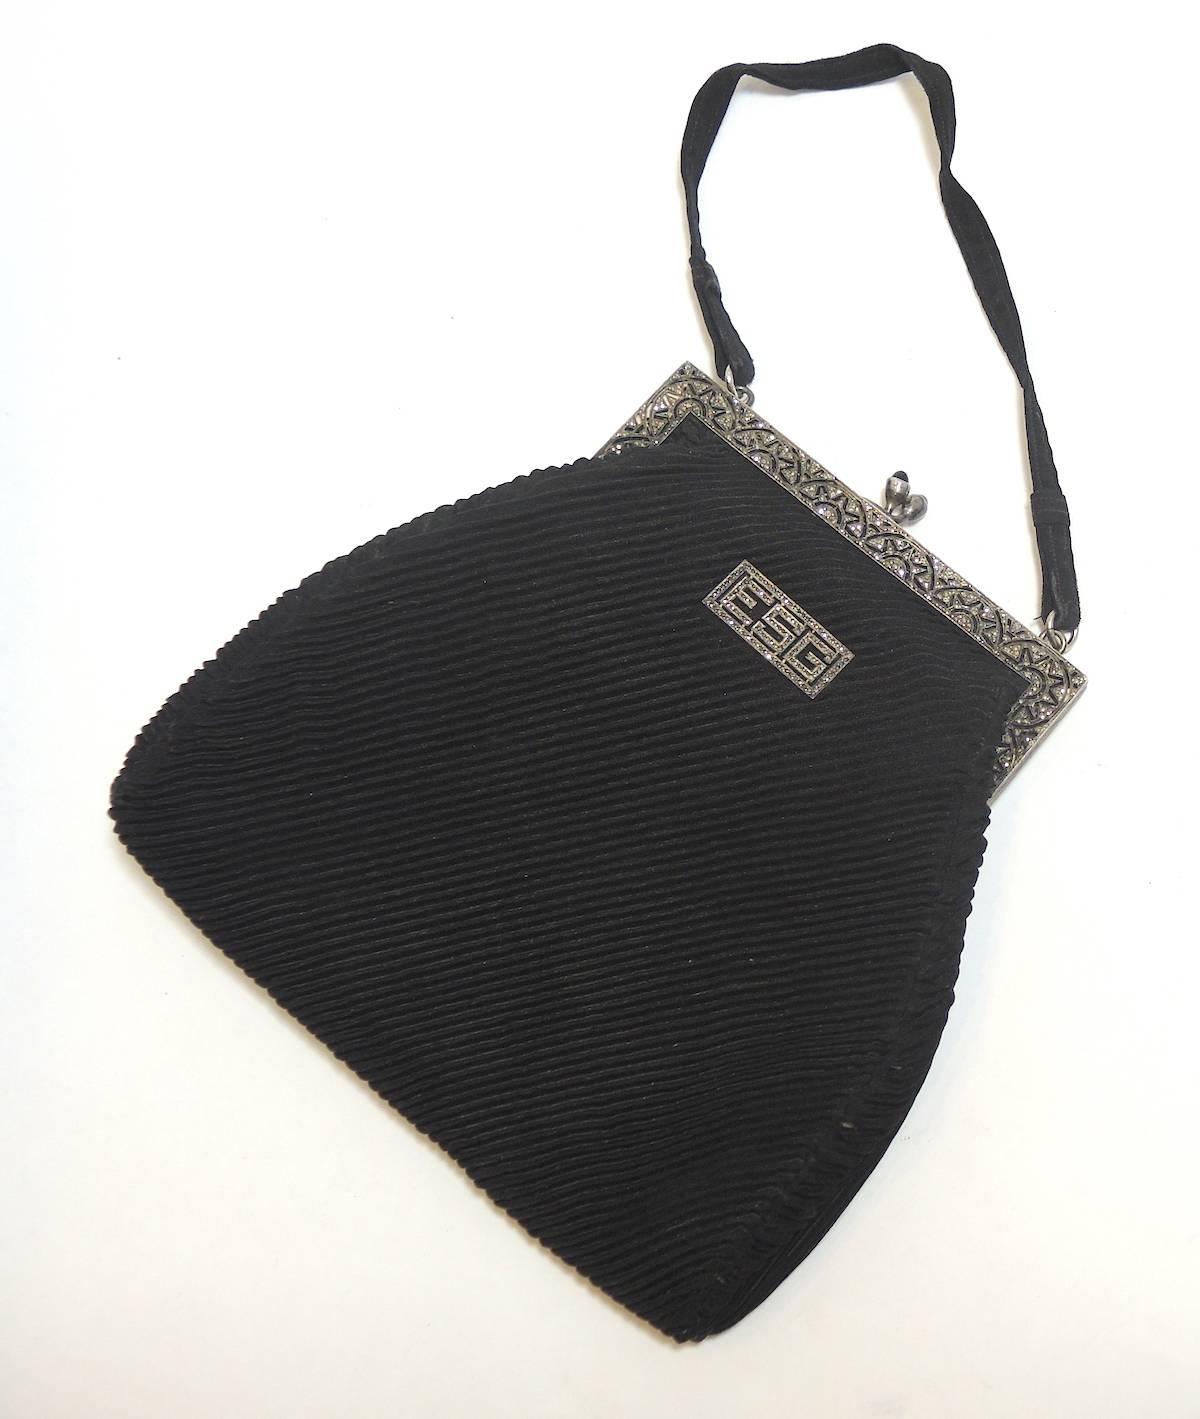 This is definitely one of a kind deco purse the fortuny pleated fabric is in excellent condition. The closure is done in marcasite and black onyx in a delicate deco design. There is a panel with the initials E.S.G Apparently for the lady that this